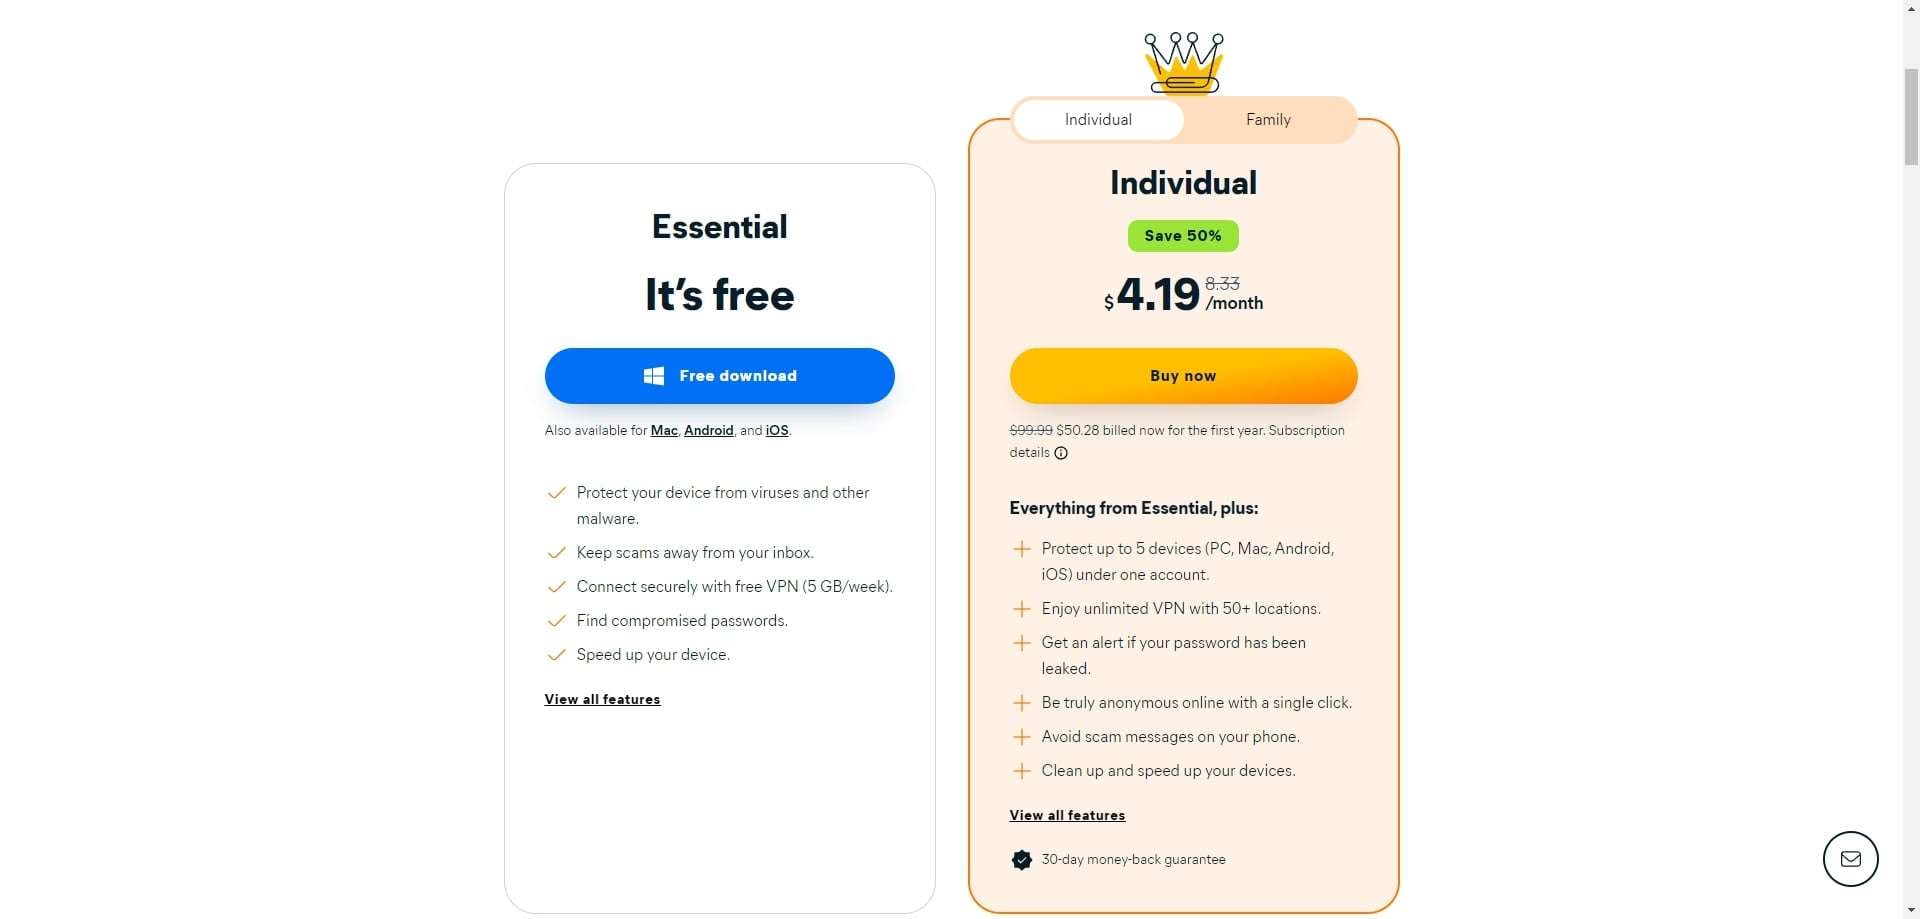 avast one pricing page 